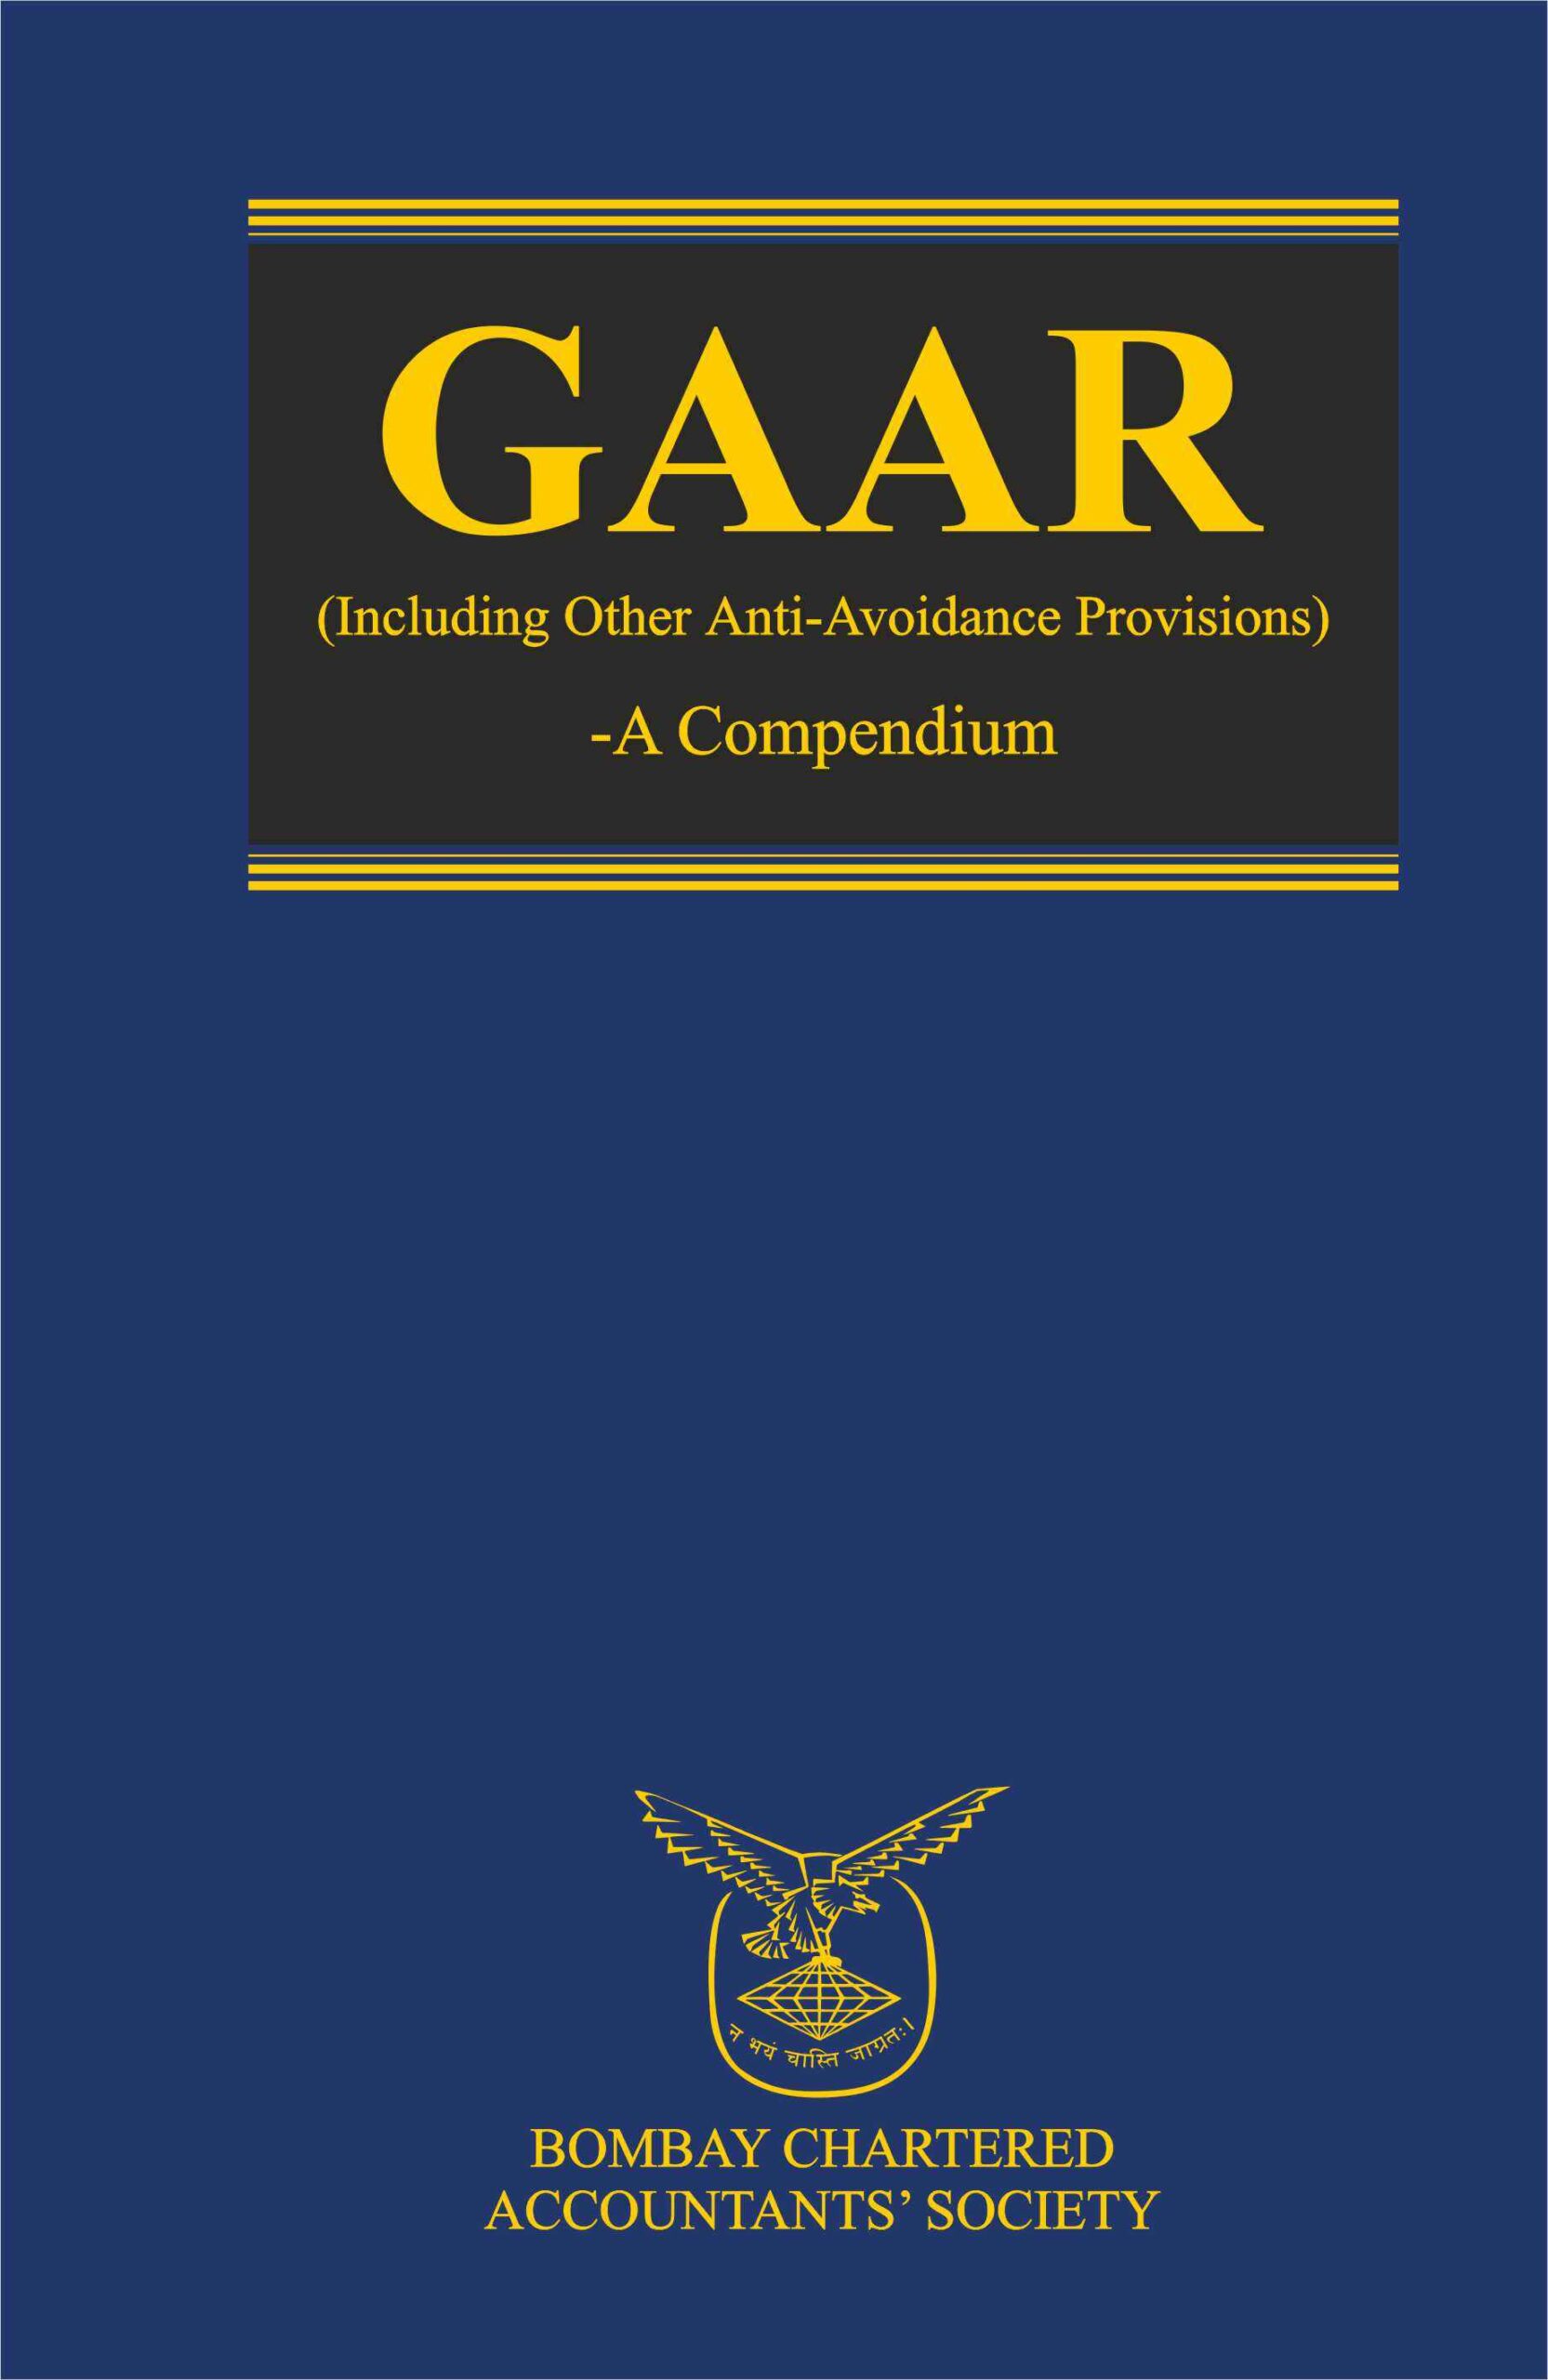 GAAR (Including other Anti-Avoidance Provisions) – A Compendium-Volume 1 & Volume 2